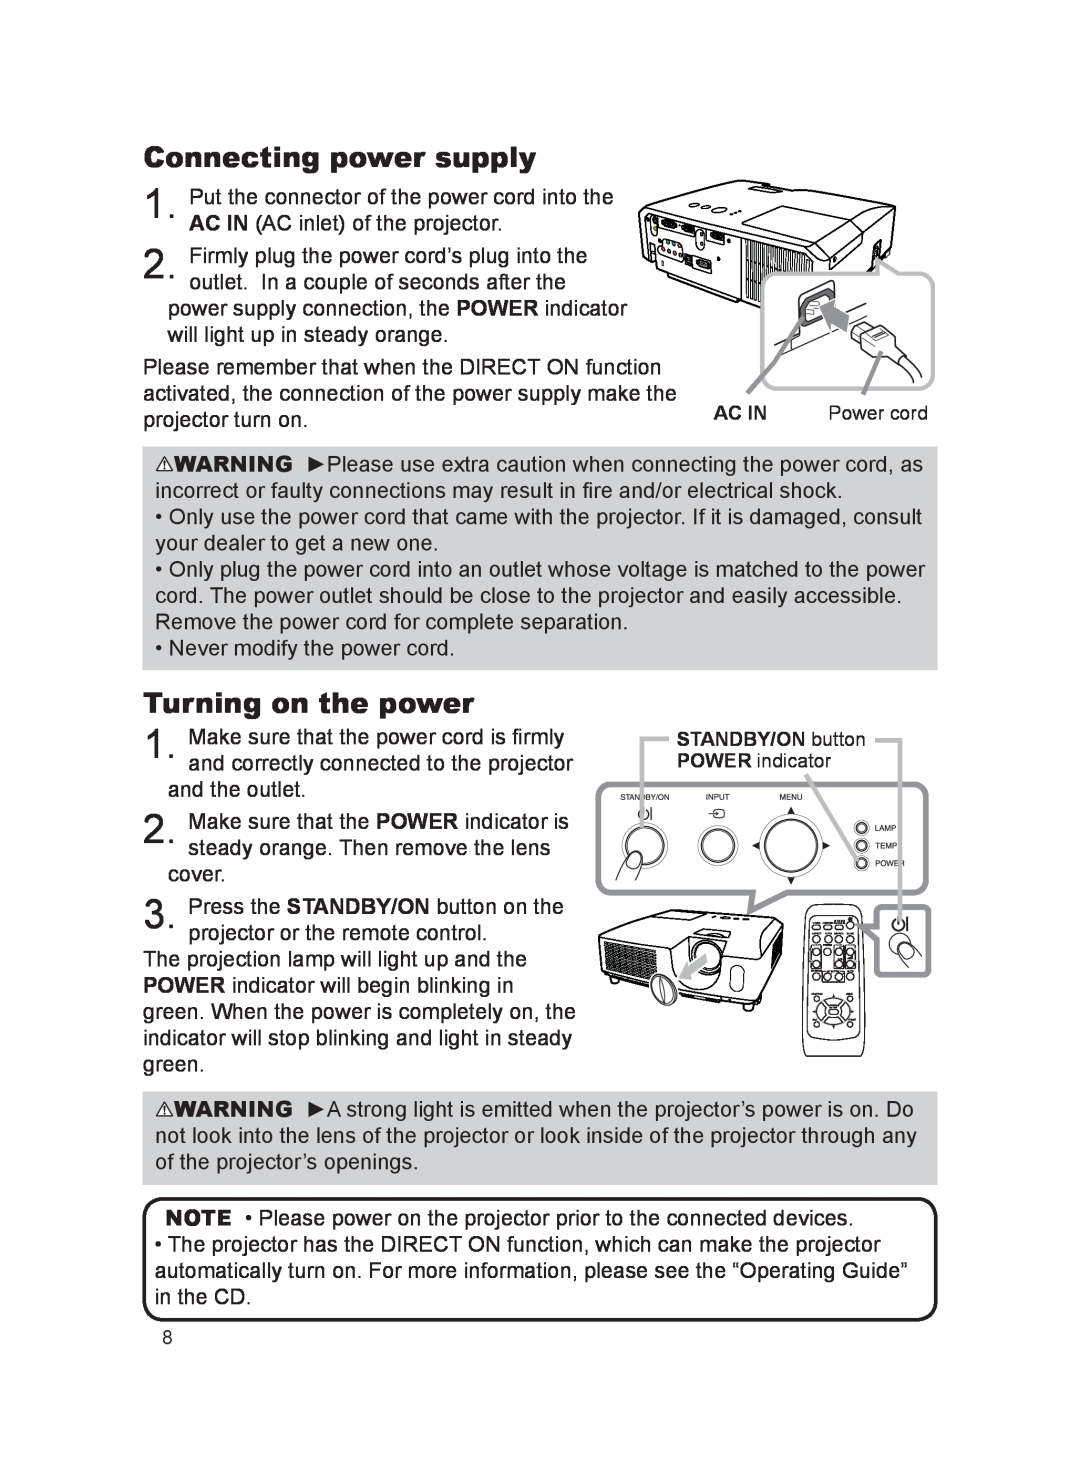 Dukane 8923H, 8922H, 8755K user manual Connecting power supply, Turning on the power 